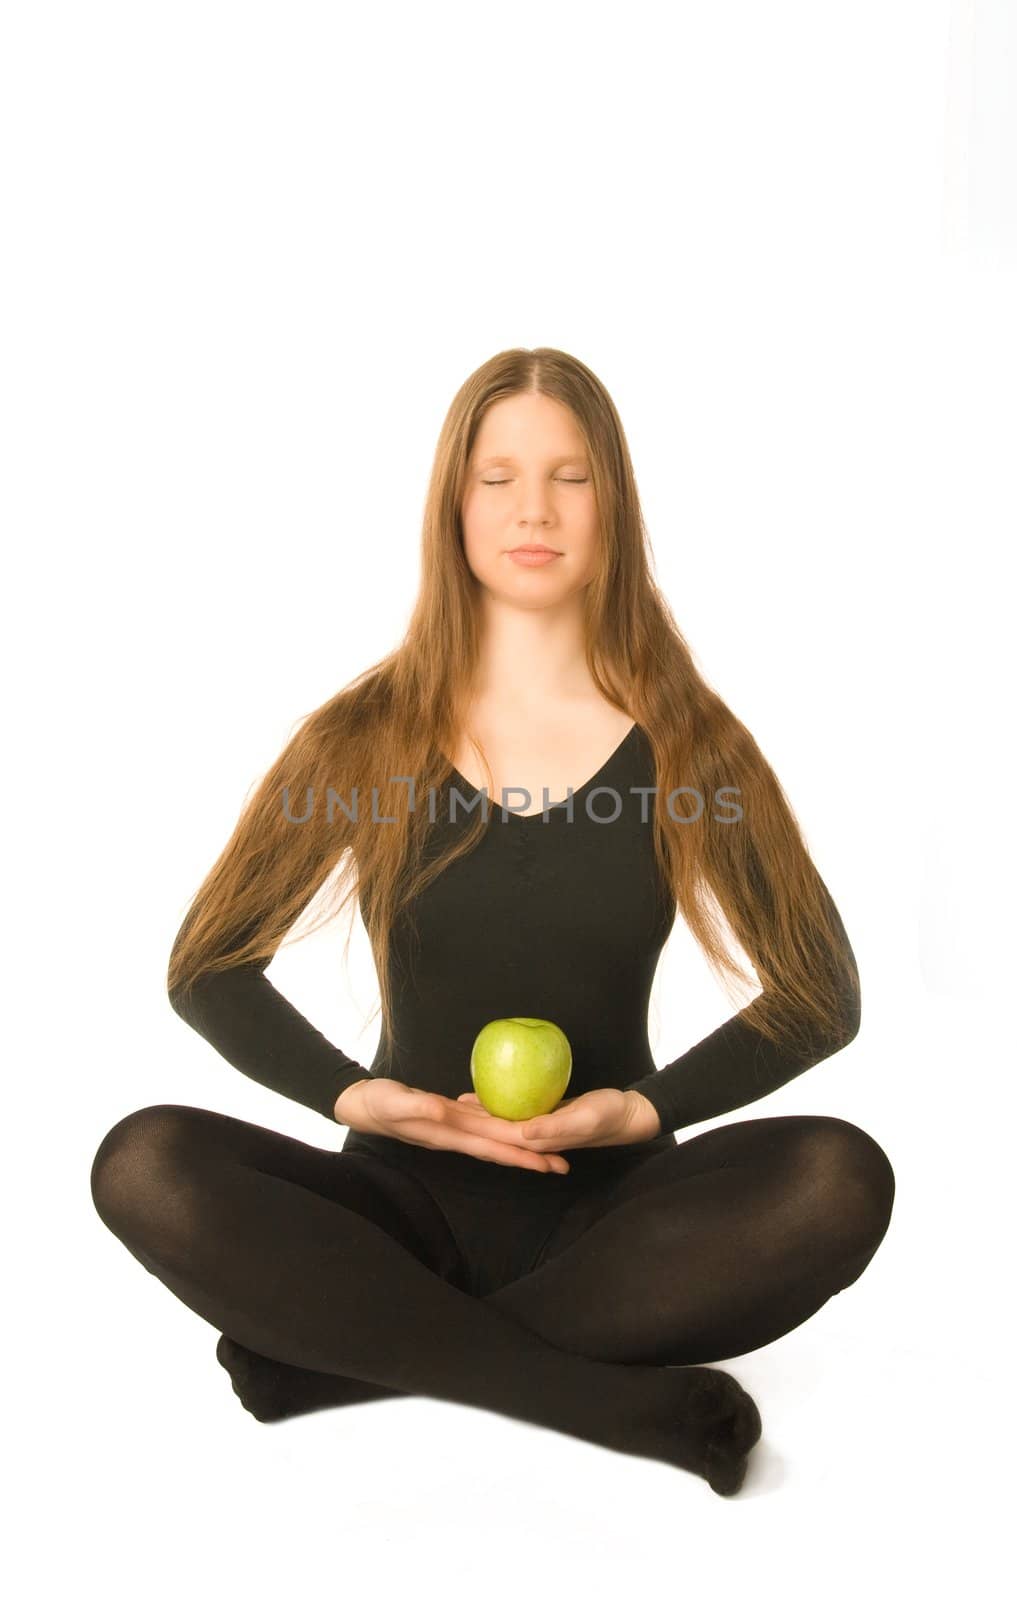 The portrait of a woman in lotus pose with a green apple in her hands
